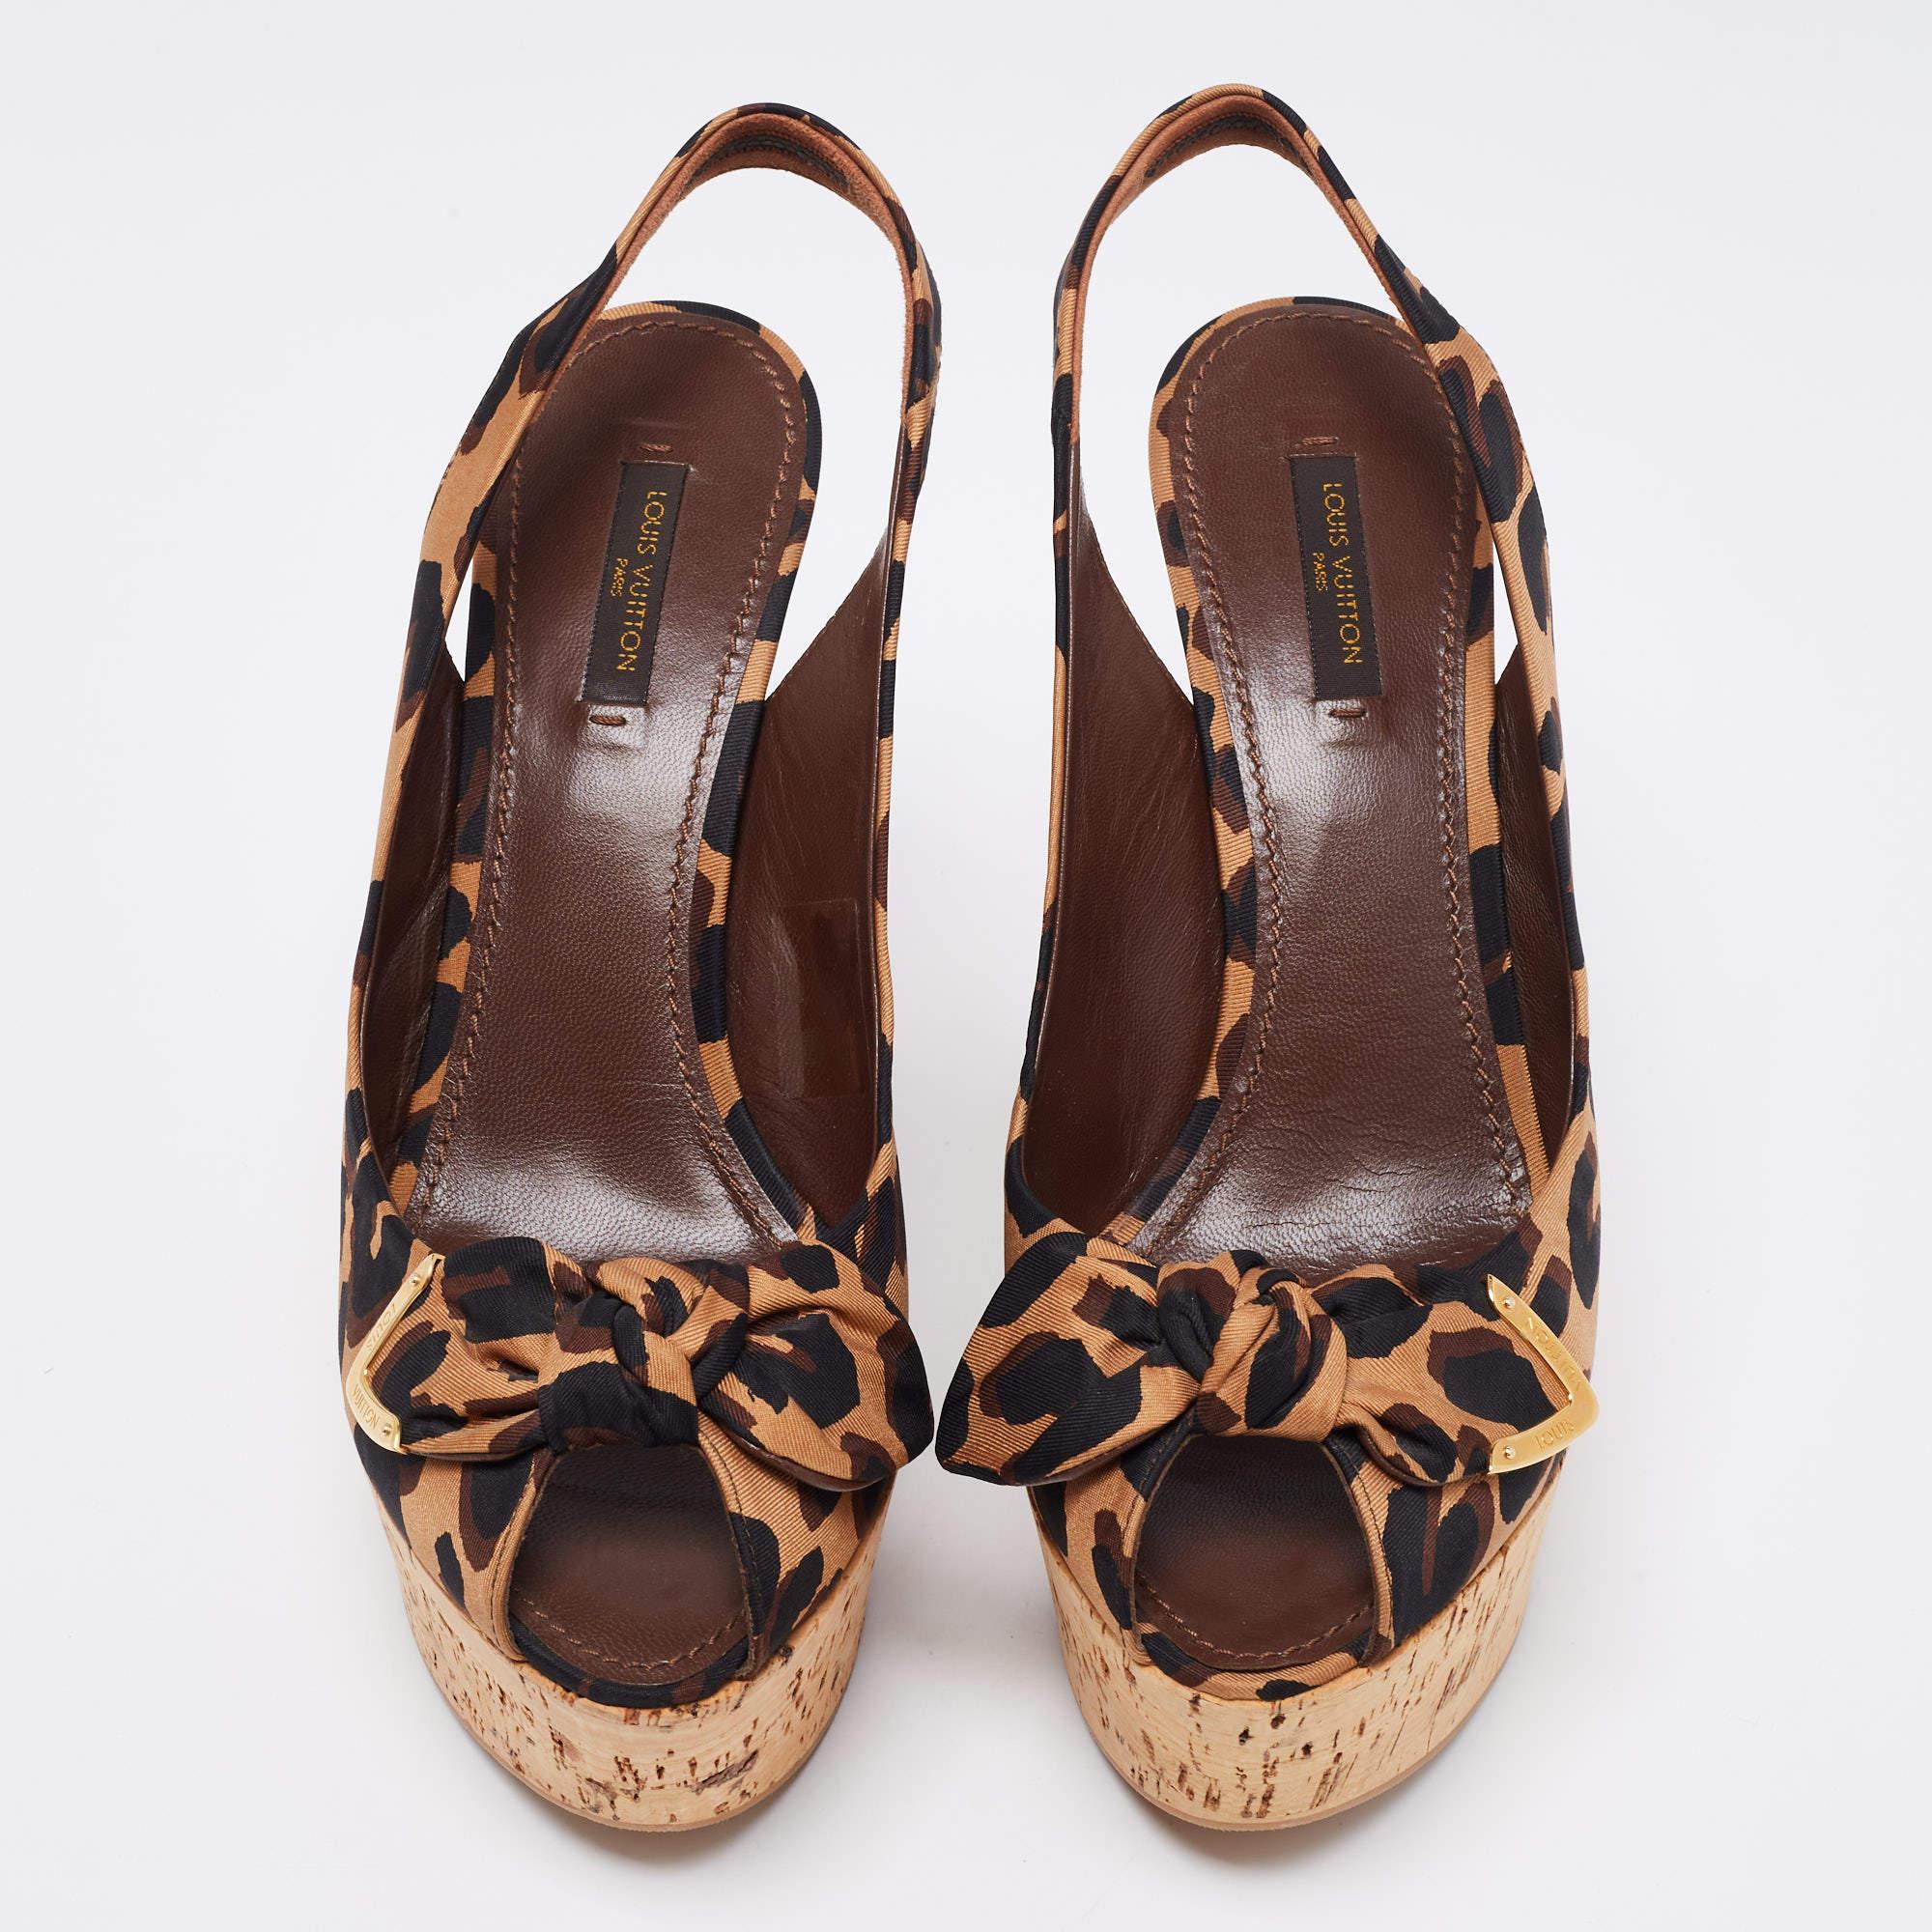 Strut with grace and style as you don these bold sandals by Louis Vuitton. Crafted from leopard-printed canvas, these tricolored beauties have bow detailing on the vamps. They are designed with platforms, slingbacks, and 13 cm wedge heels.

